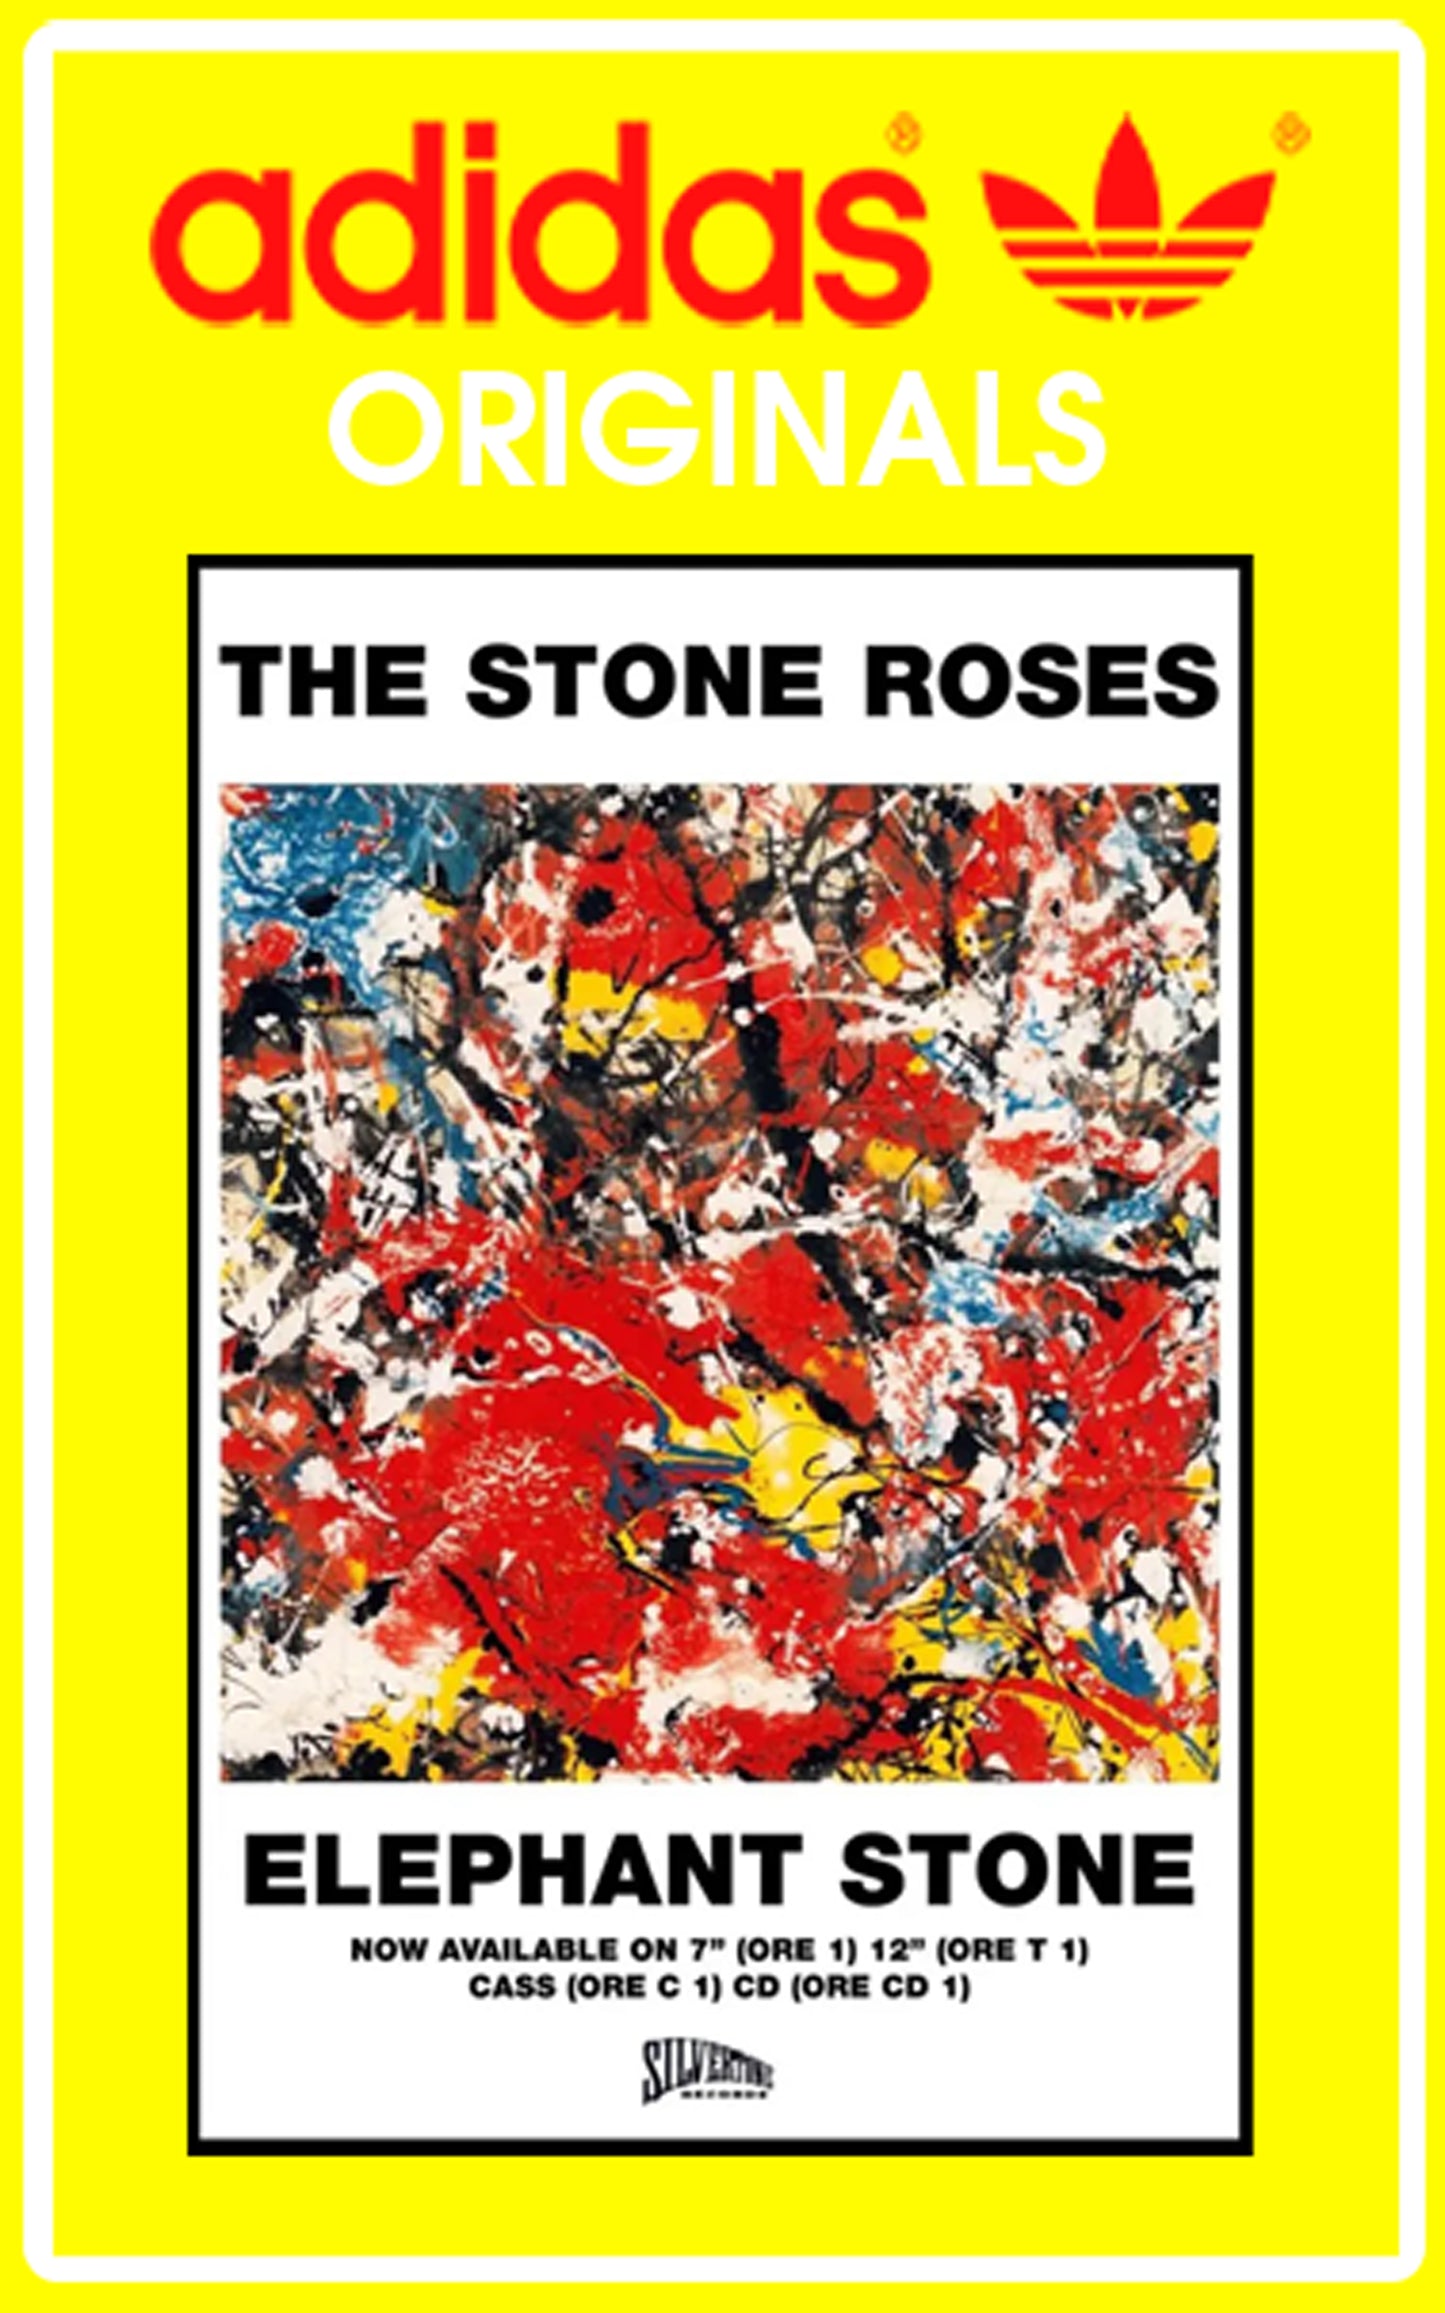 Limited edition The Stone Roses Elephant Stone Adidas Sunshine yellow / red  trainers / sneakers